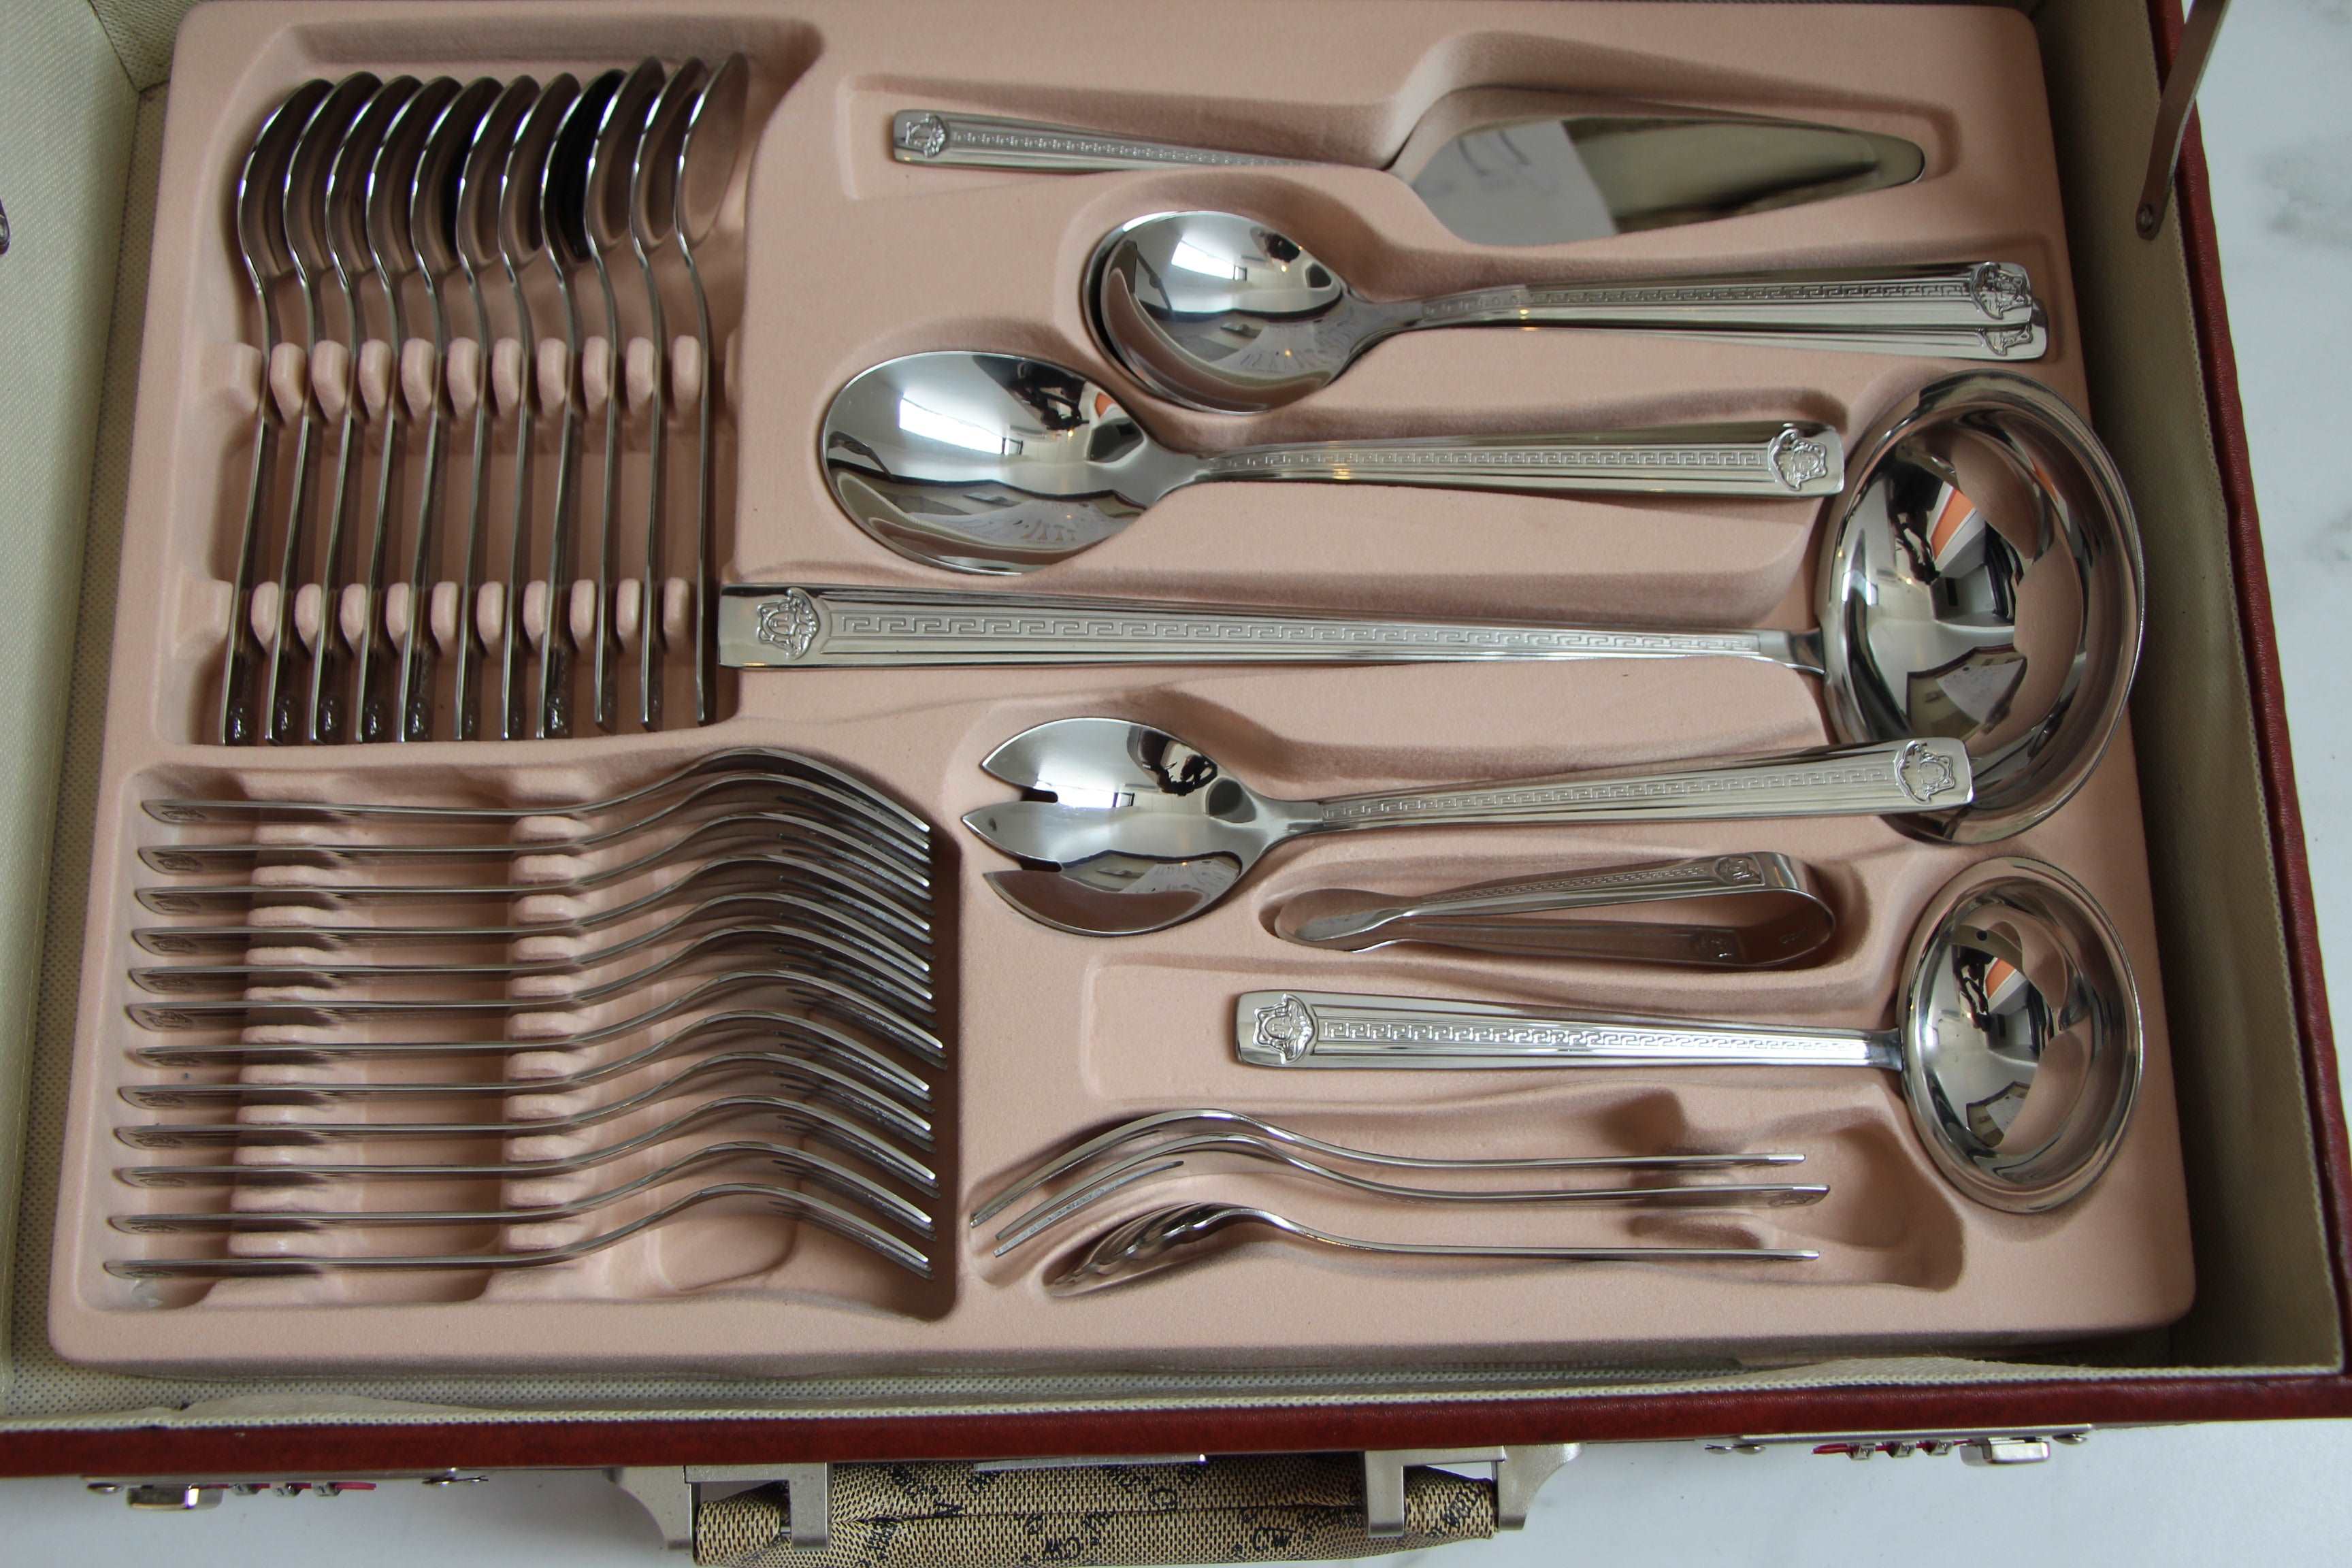 Flatware Cutlery 78 piece set from Carl Weill Tulip Capri 18/10 Stainless Steel Service for 12 People + 12 Serving Pieces - Royal Gift